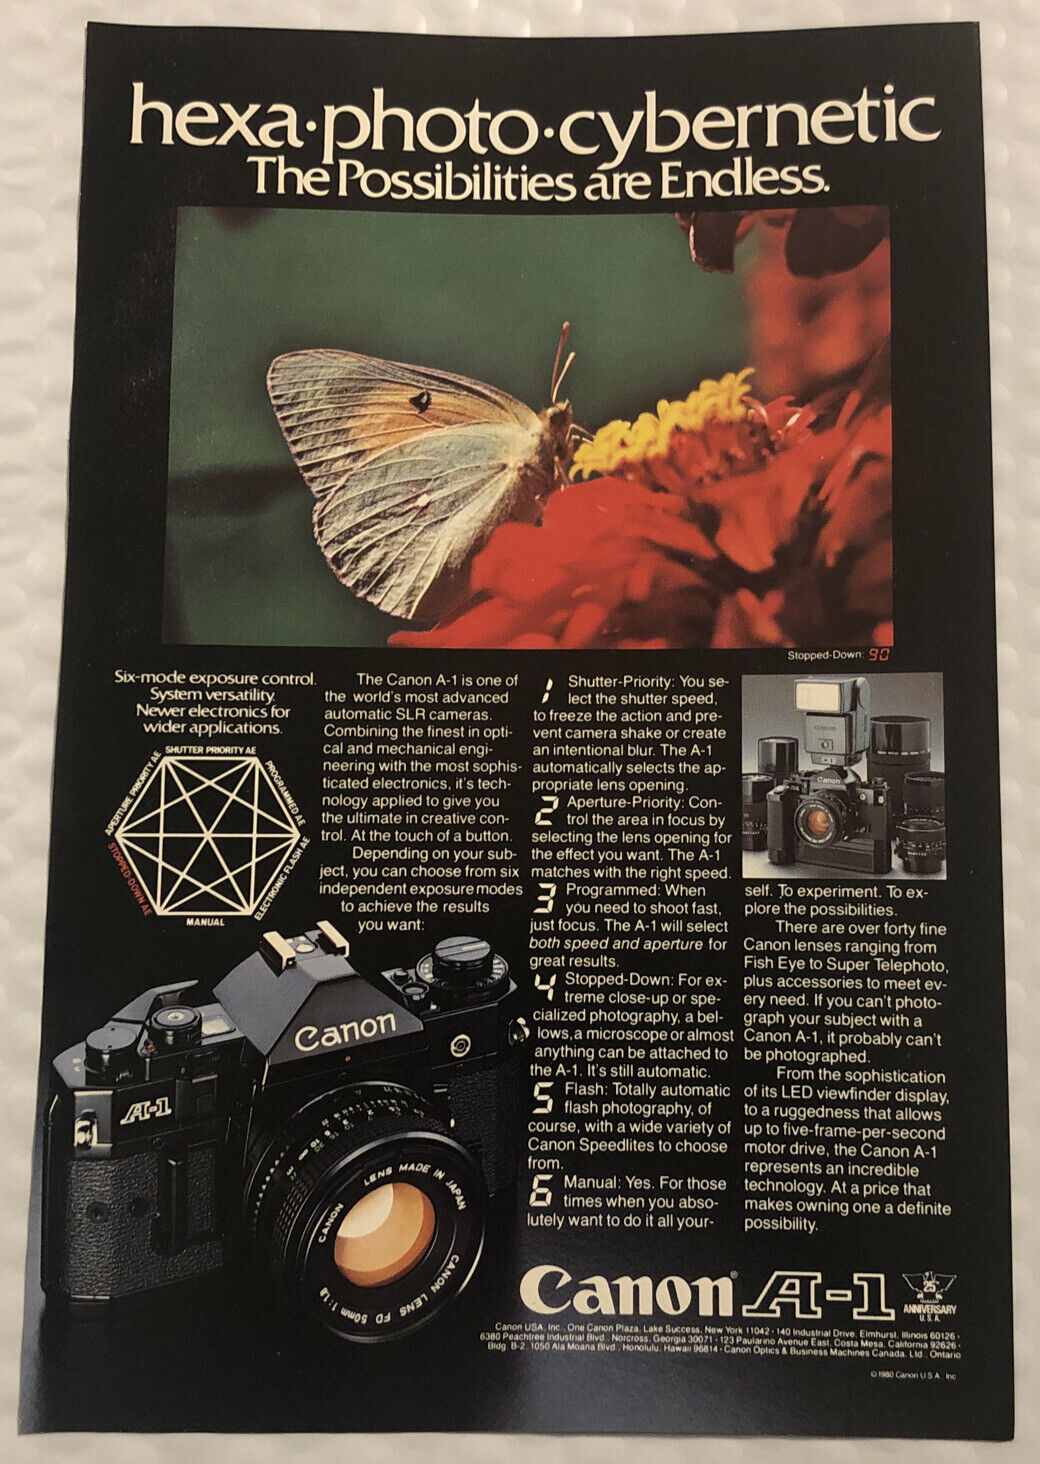 Vintage 1980 Canon A-1 Original Print Ad Full Page - Hexa Photo Cybernetic